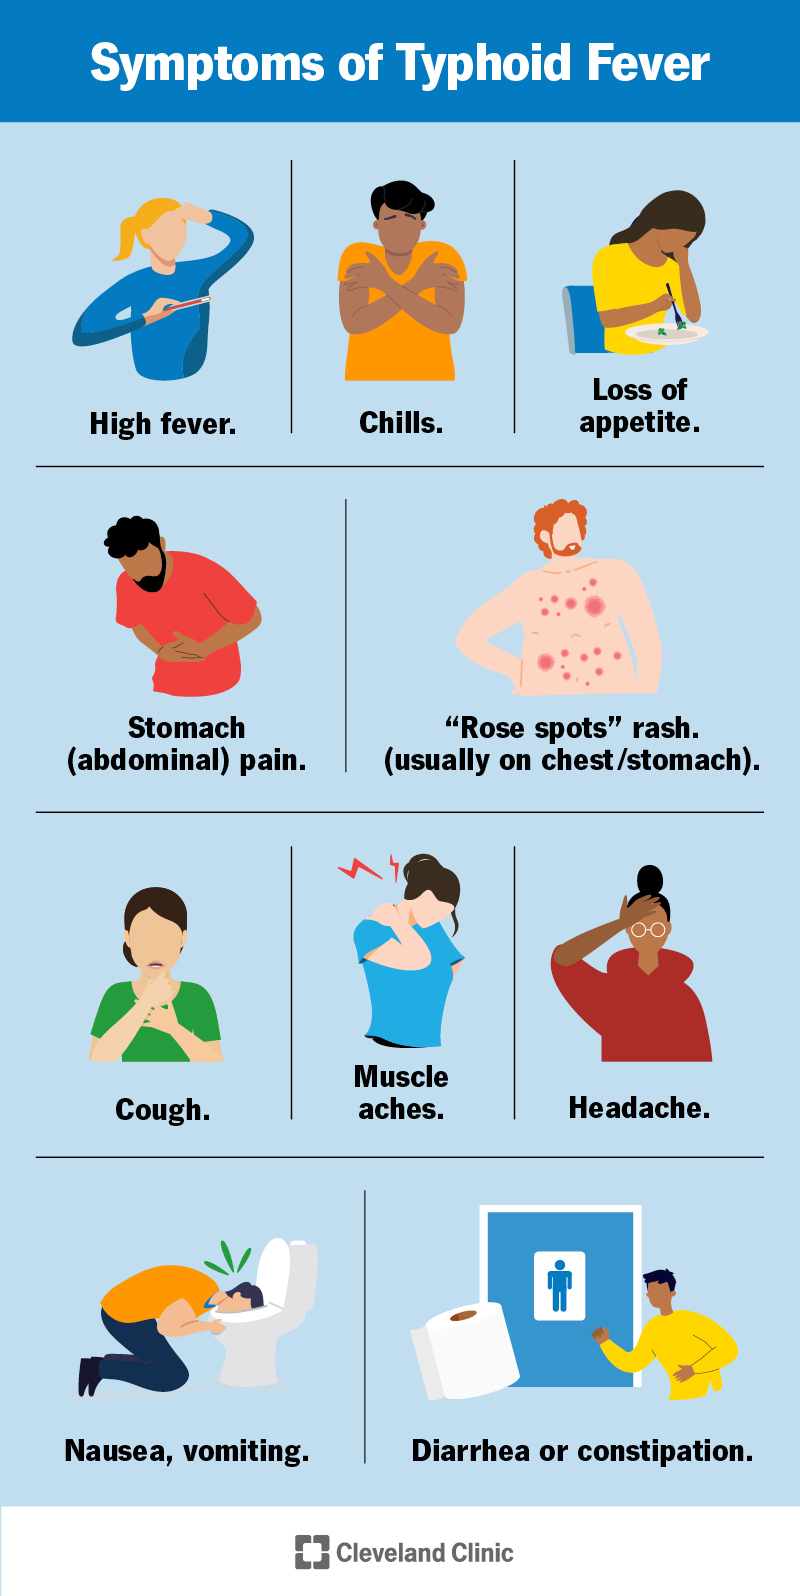 Symptoms of typhoid include high fever, stomach pain, rash, cough, muscle aches, vomiting, diarrhea, constipation and more.